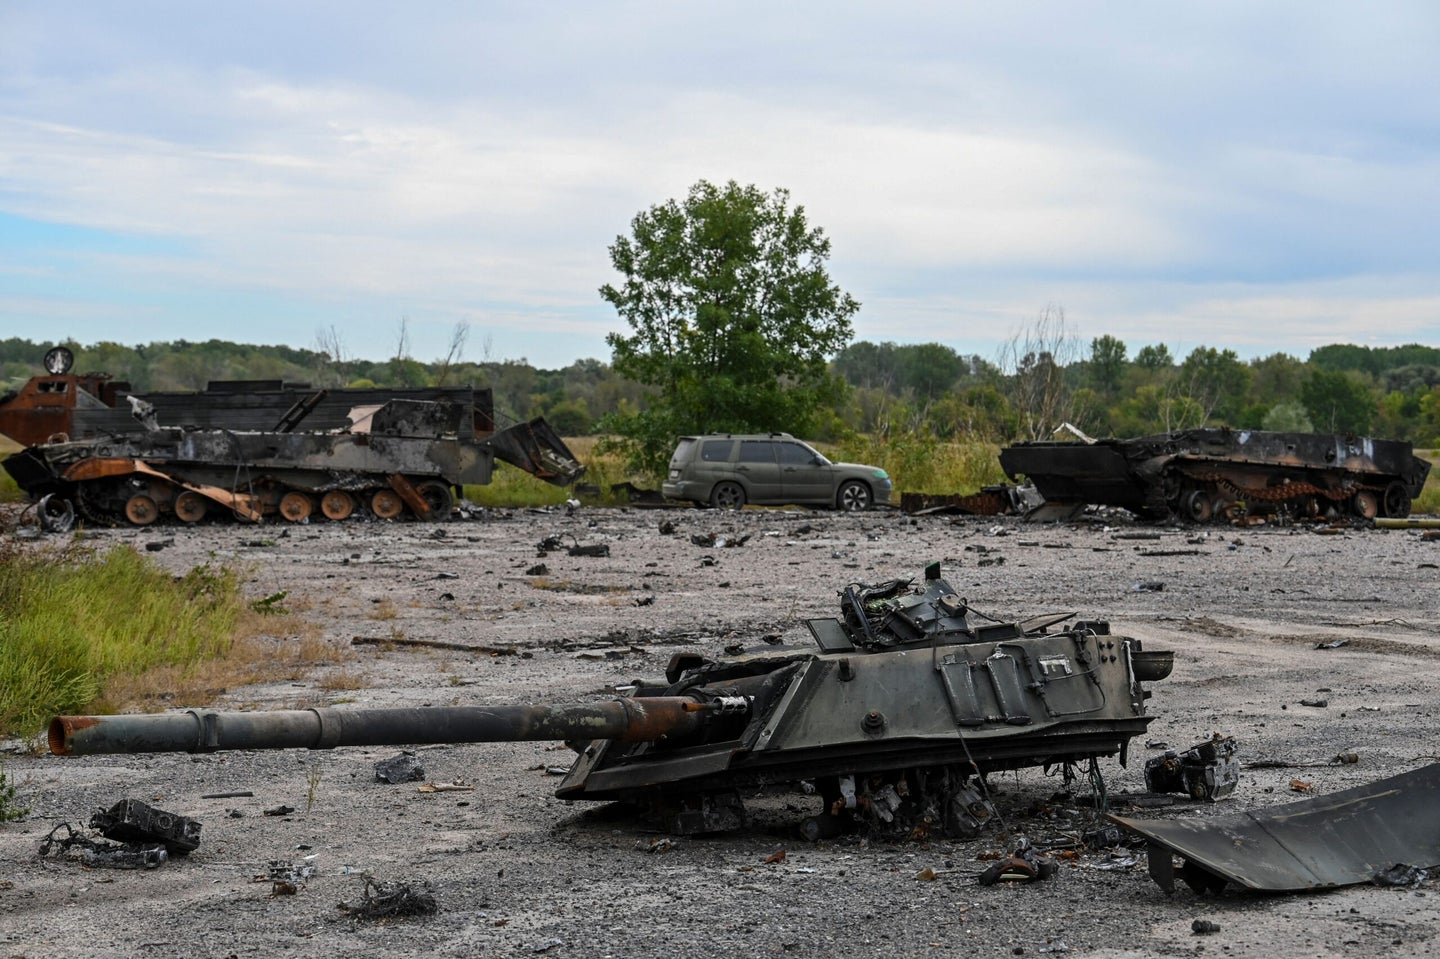 This photograph taken in Balakliya, Kharkiv region, on September 10, 2022 shows a destroyed military tank. - Ukrainian forces said September 10, 2022 they had entered the town of Kupiansk in eastern Ukraine, dislodging Russian troops from a key logistics hub in a lightning counter-offensive that has seen swathes of territory recaptured. (Photo by JUAN BARRETO/AFP via Getty Images)